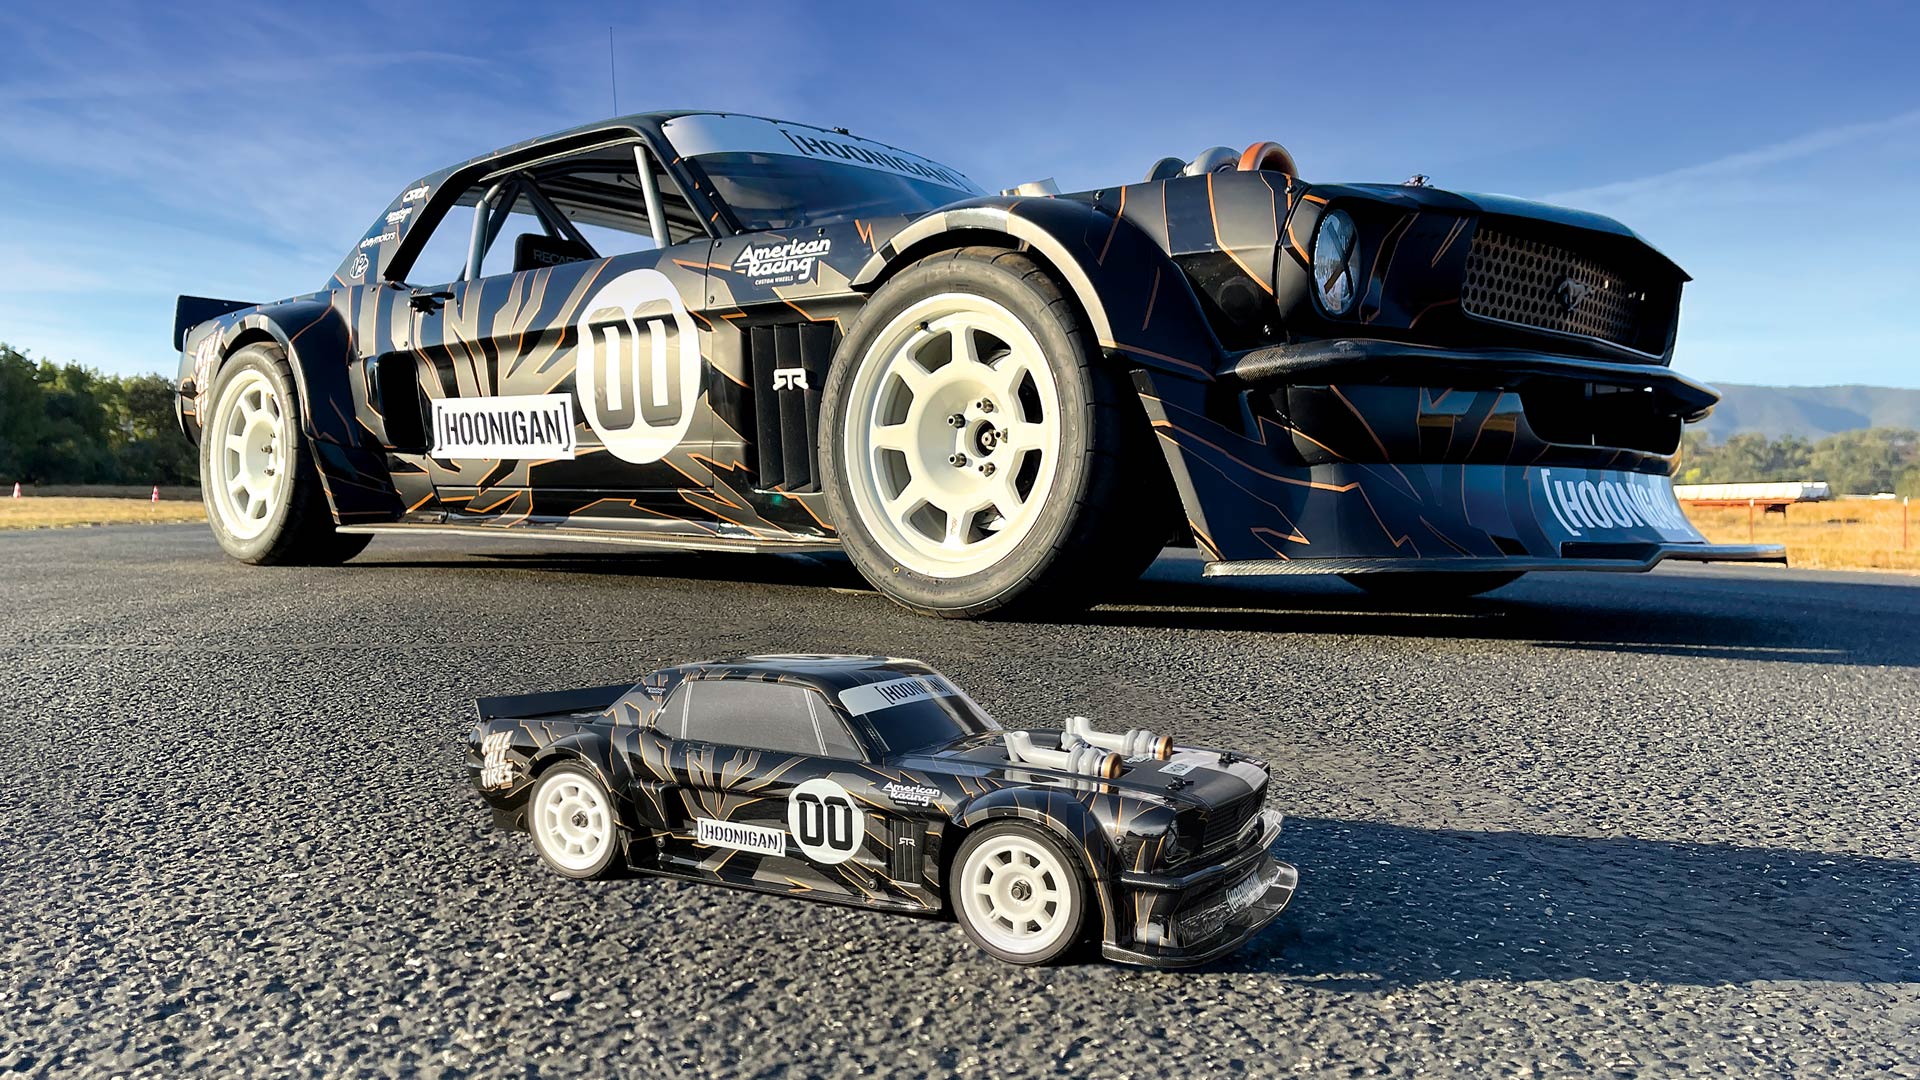 Ken Block’s wonderful ‘Hoonicorn’ Ford Mustang is now an RC automobile